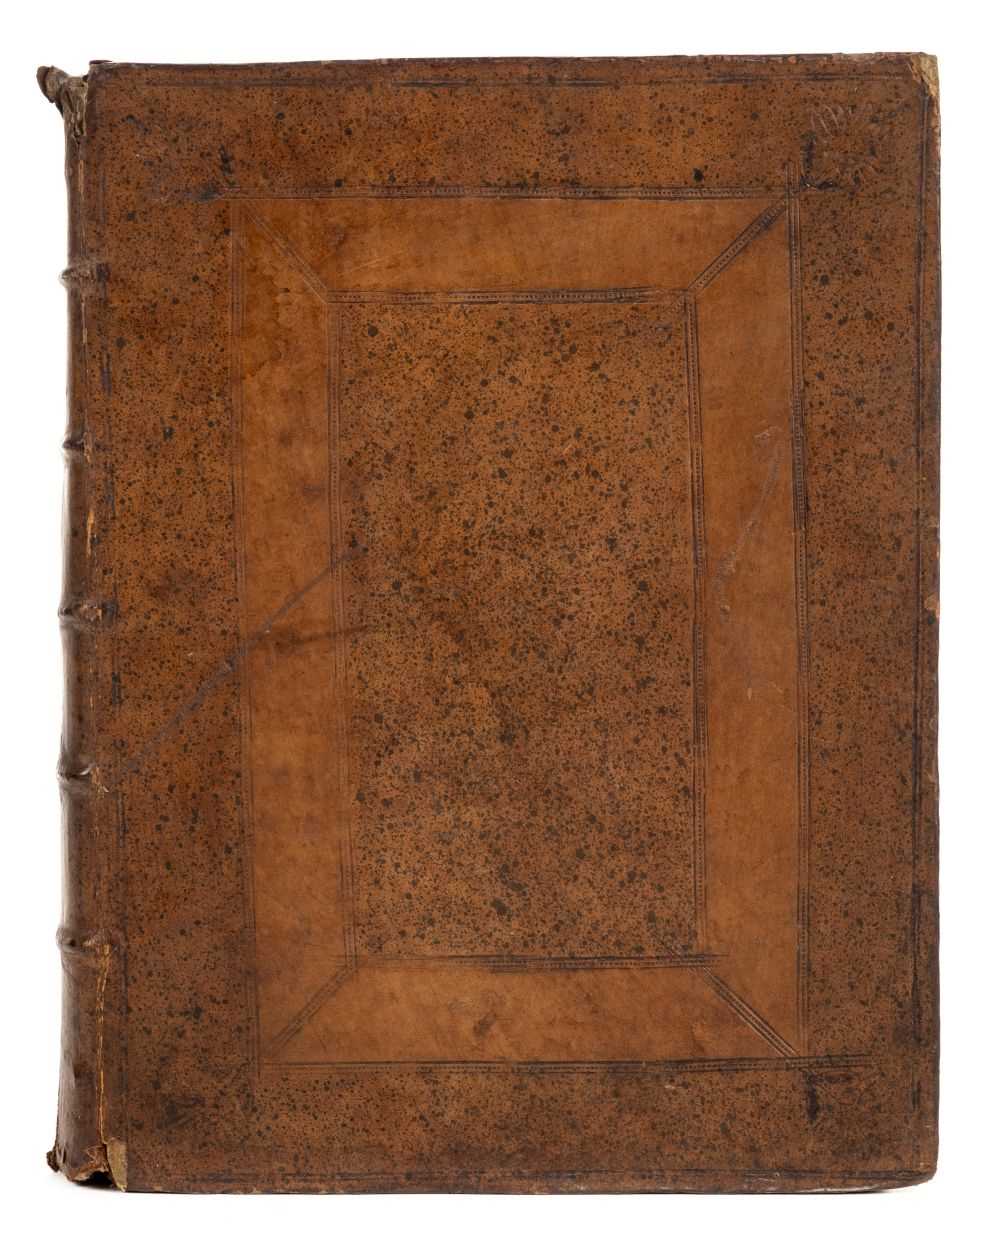 Lot 211 - Justice (Alexander). A General Treatise of Monies and Exchanges, 1st edition, 1707